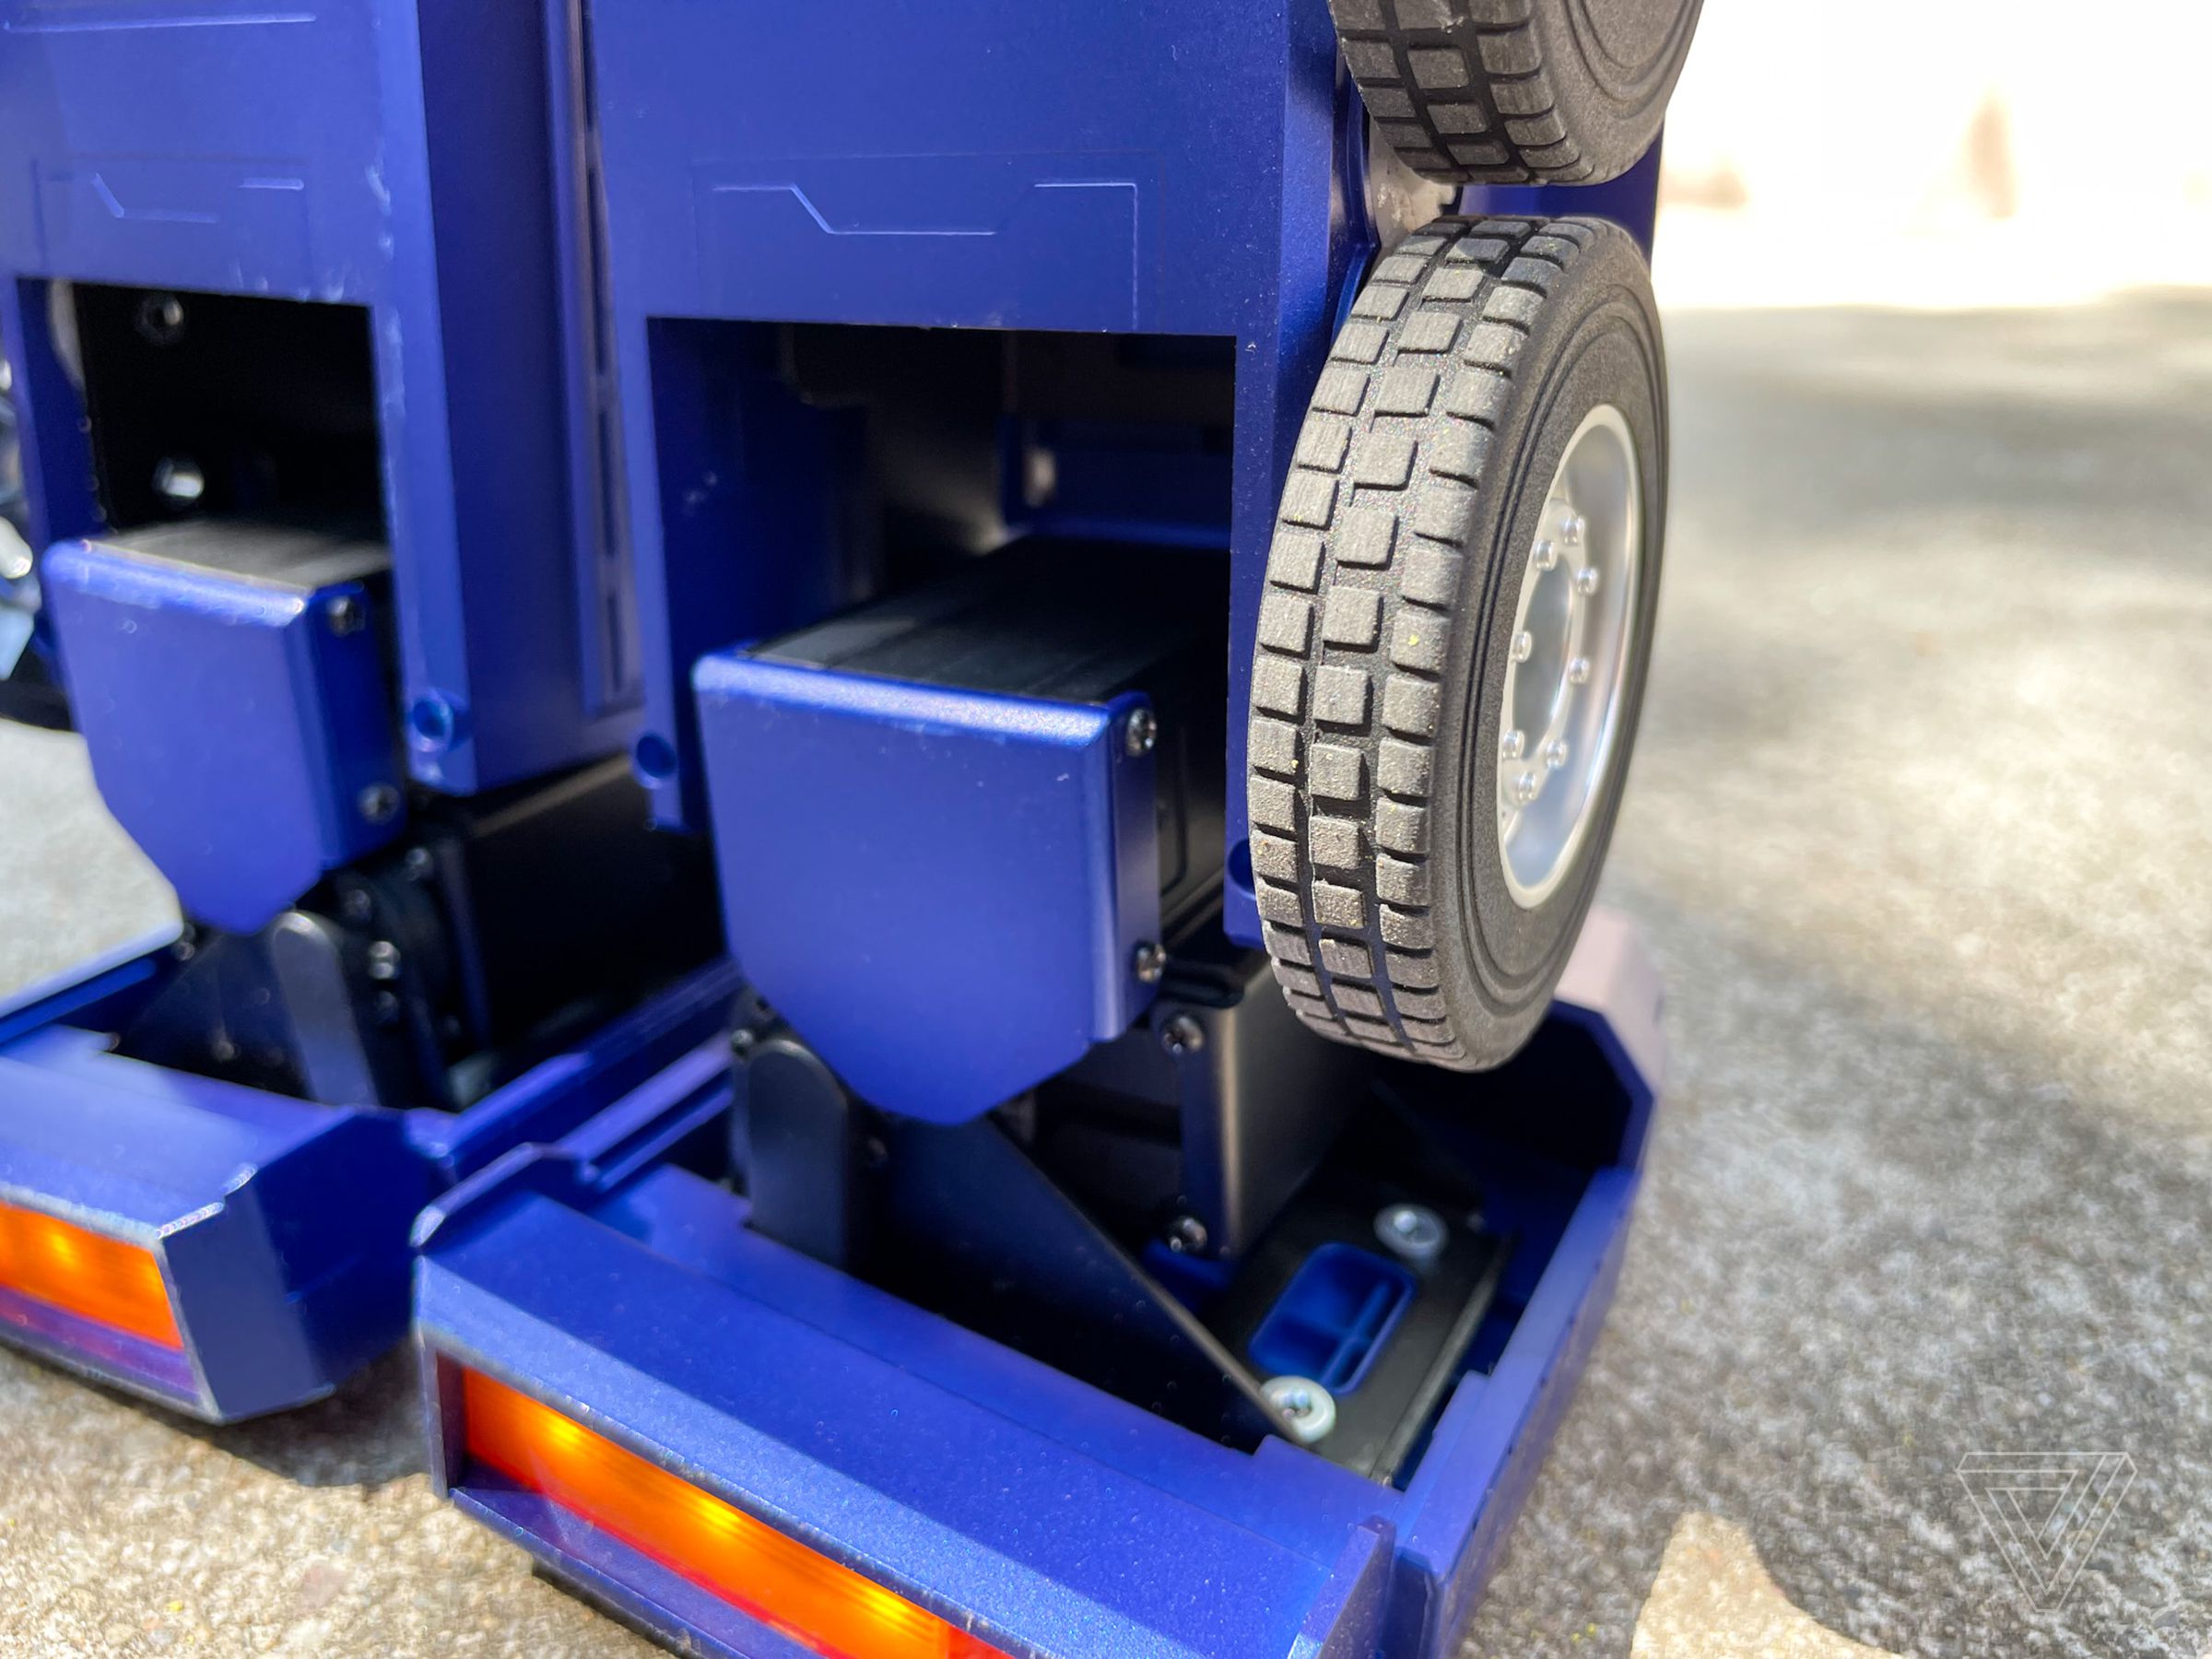 The ankle provides the clearest views of one of the 27 servo motors that power Optimus.